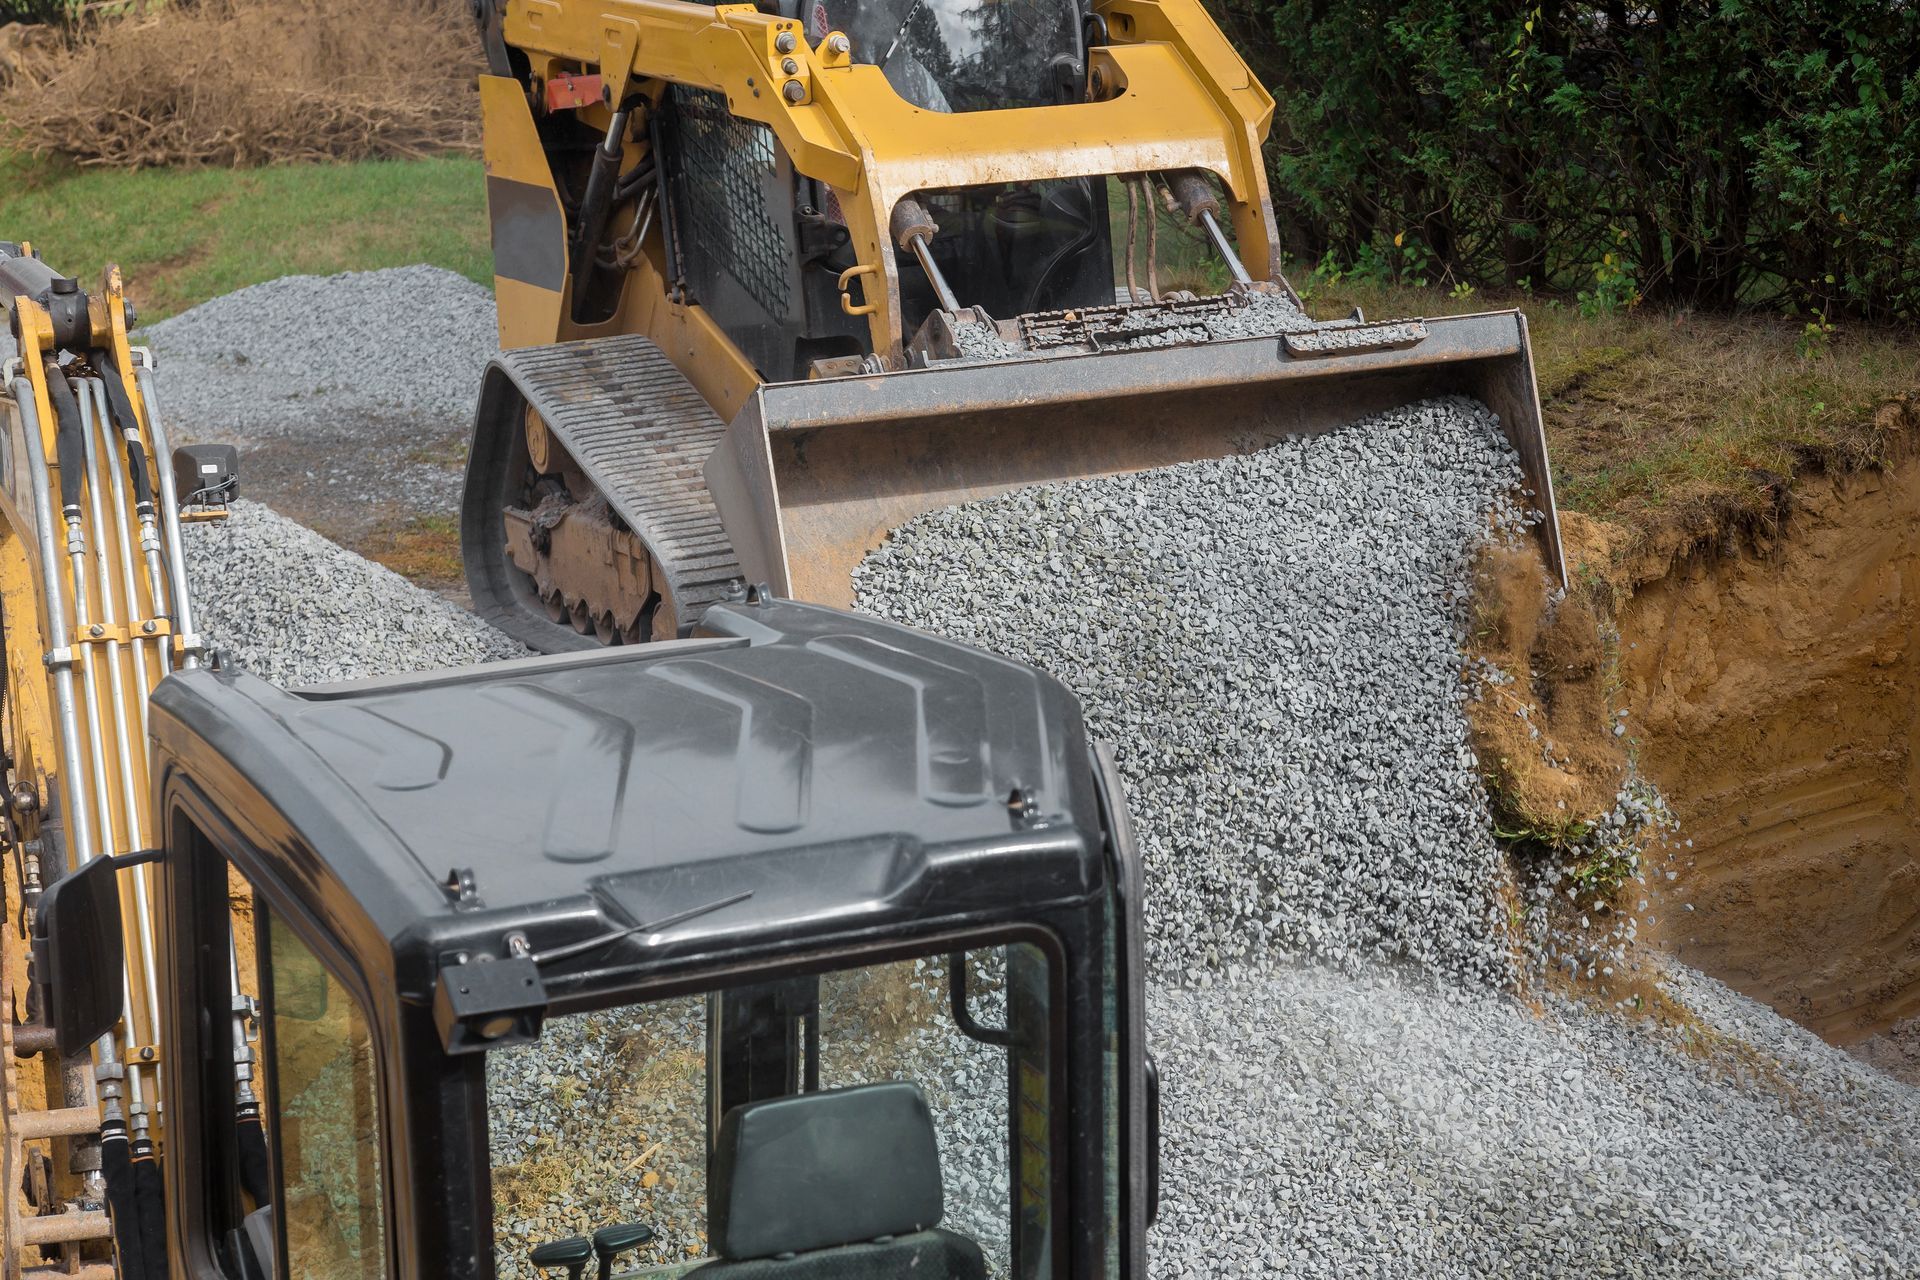 A bulldozer is loading gravel into a small excavator